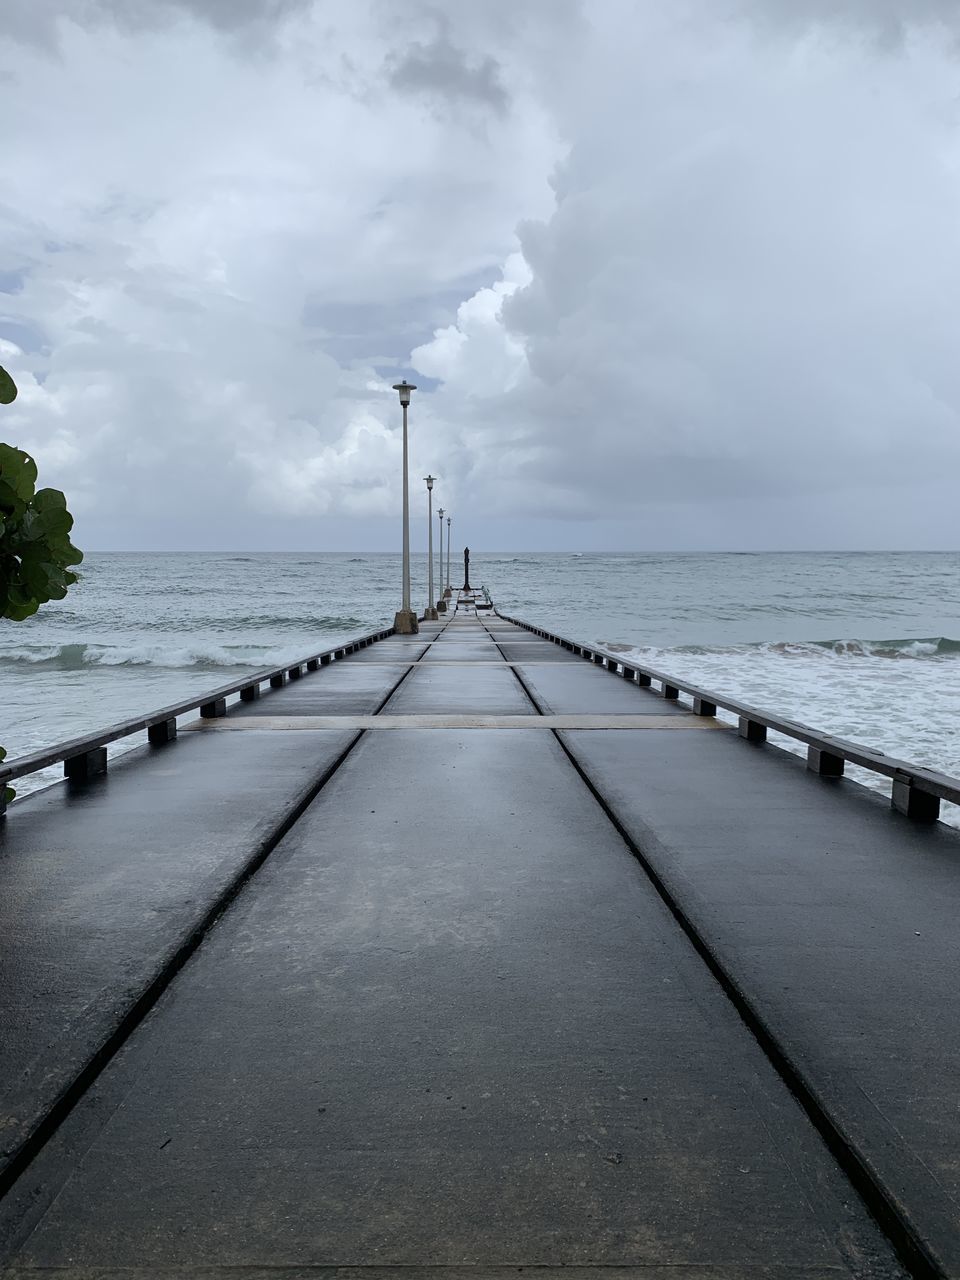 water, sky, sea, cloud - sky, the way forward, direction, diminishing perspective, horizon over water, horizon, nature, scenics - nature, beauty in nature, day, pier, no people, tranquility, vanishing point, built structure, outdoors, long